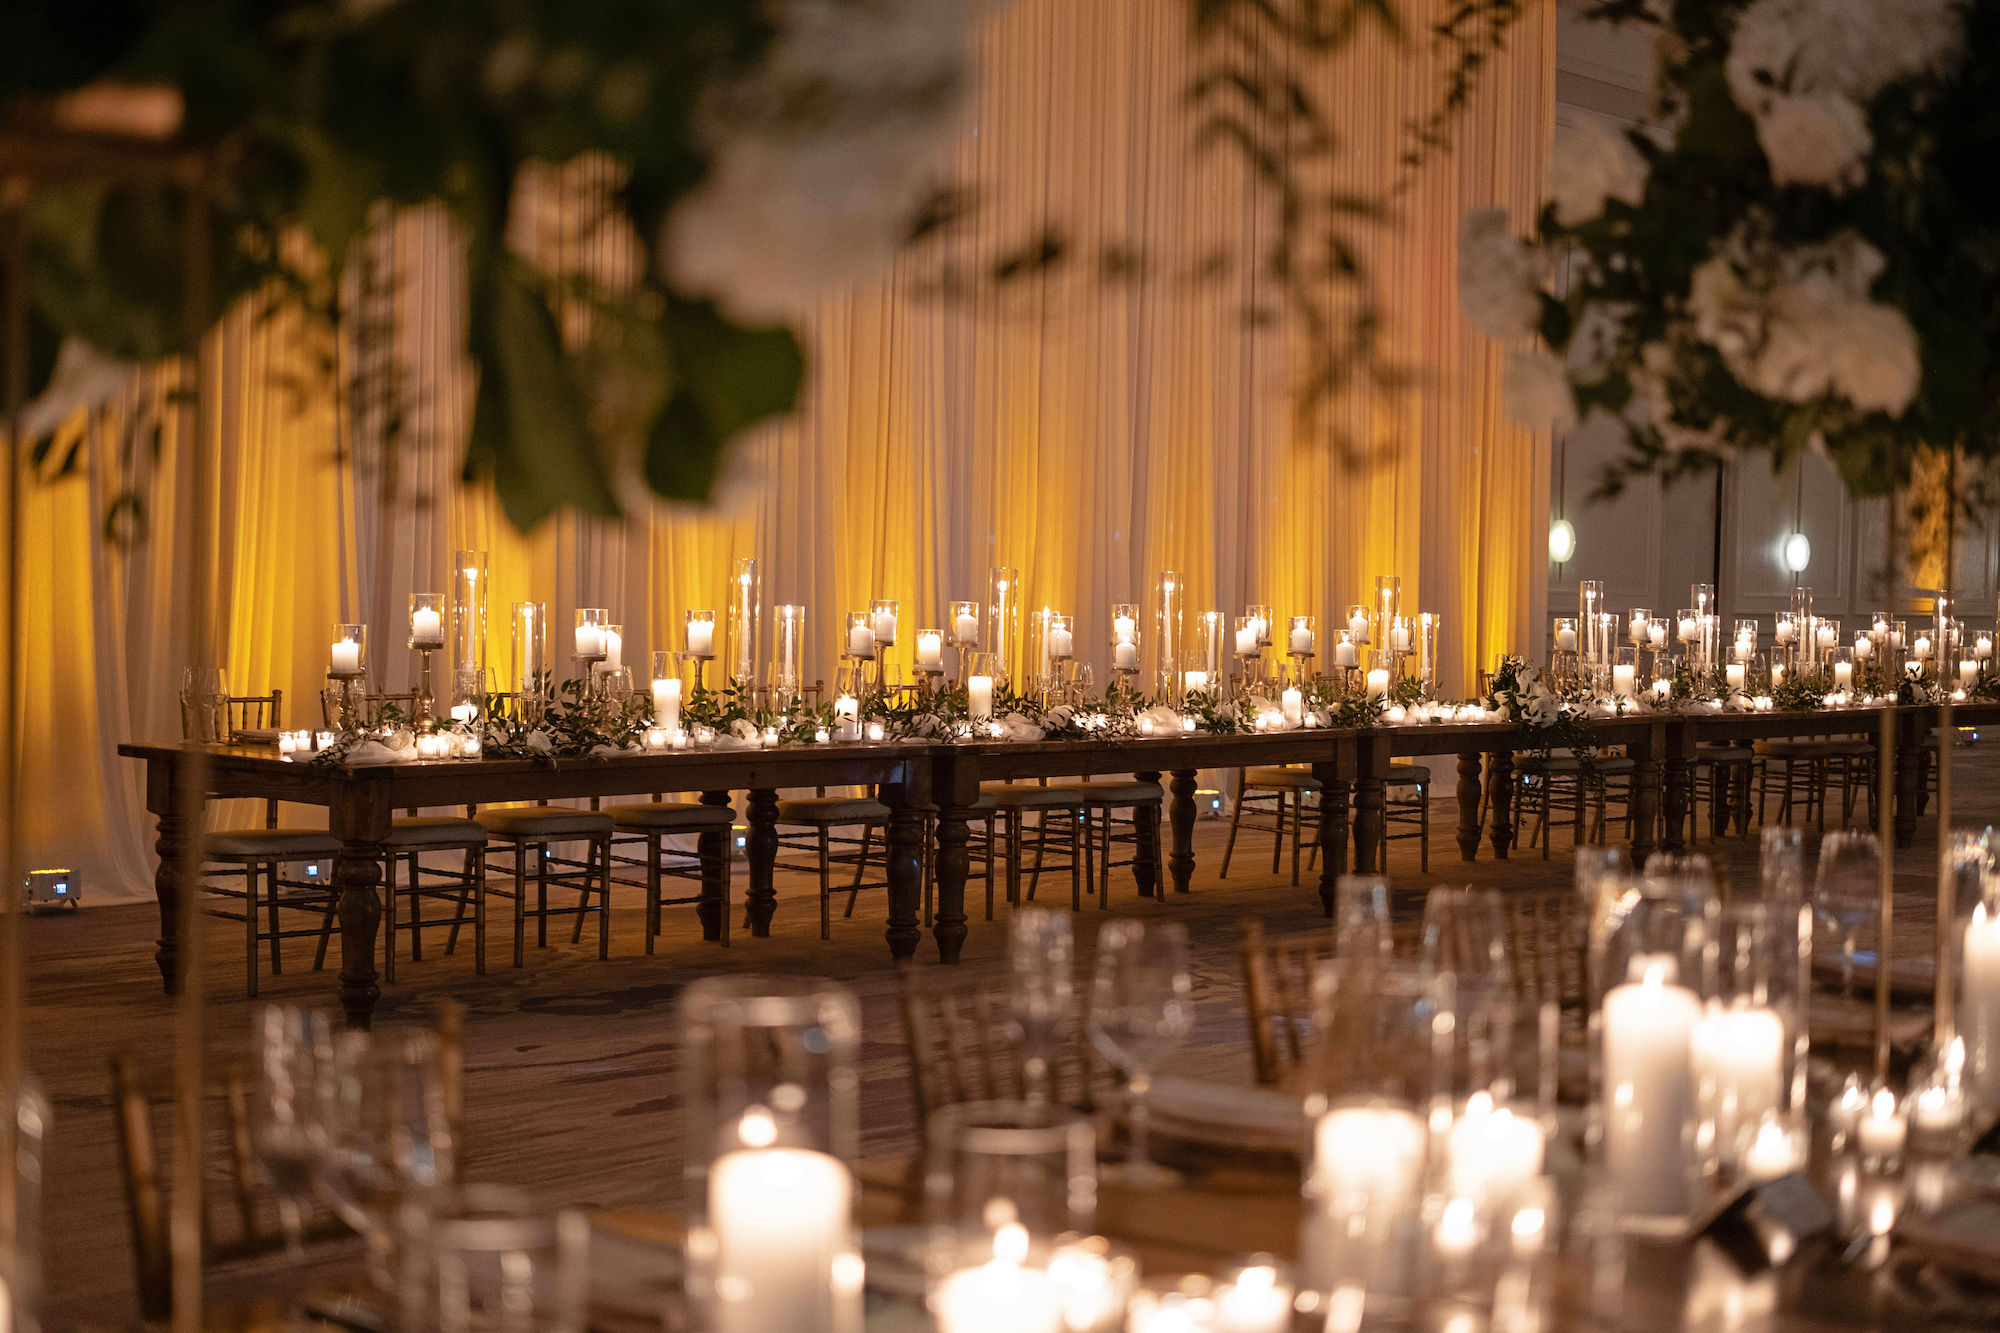 Long Feasting Tables | Whimsical Candlelit Centerpieces | Gold Chiavari Chairs | Tampa Bay Wedding Rental Company A Chair Affair